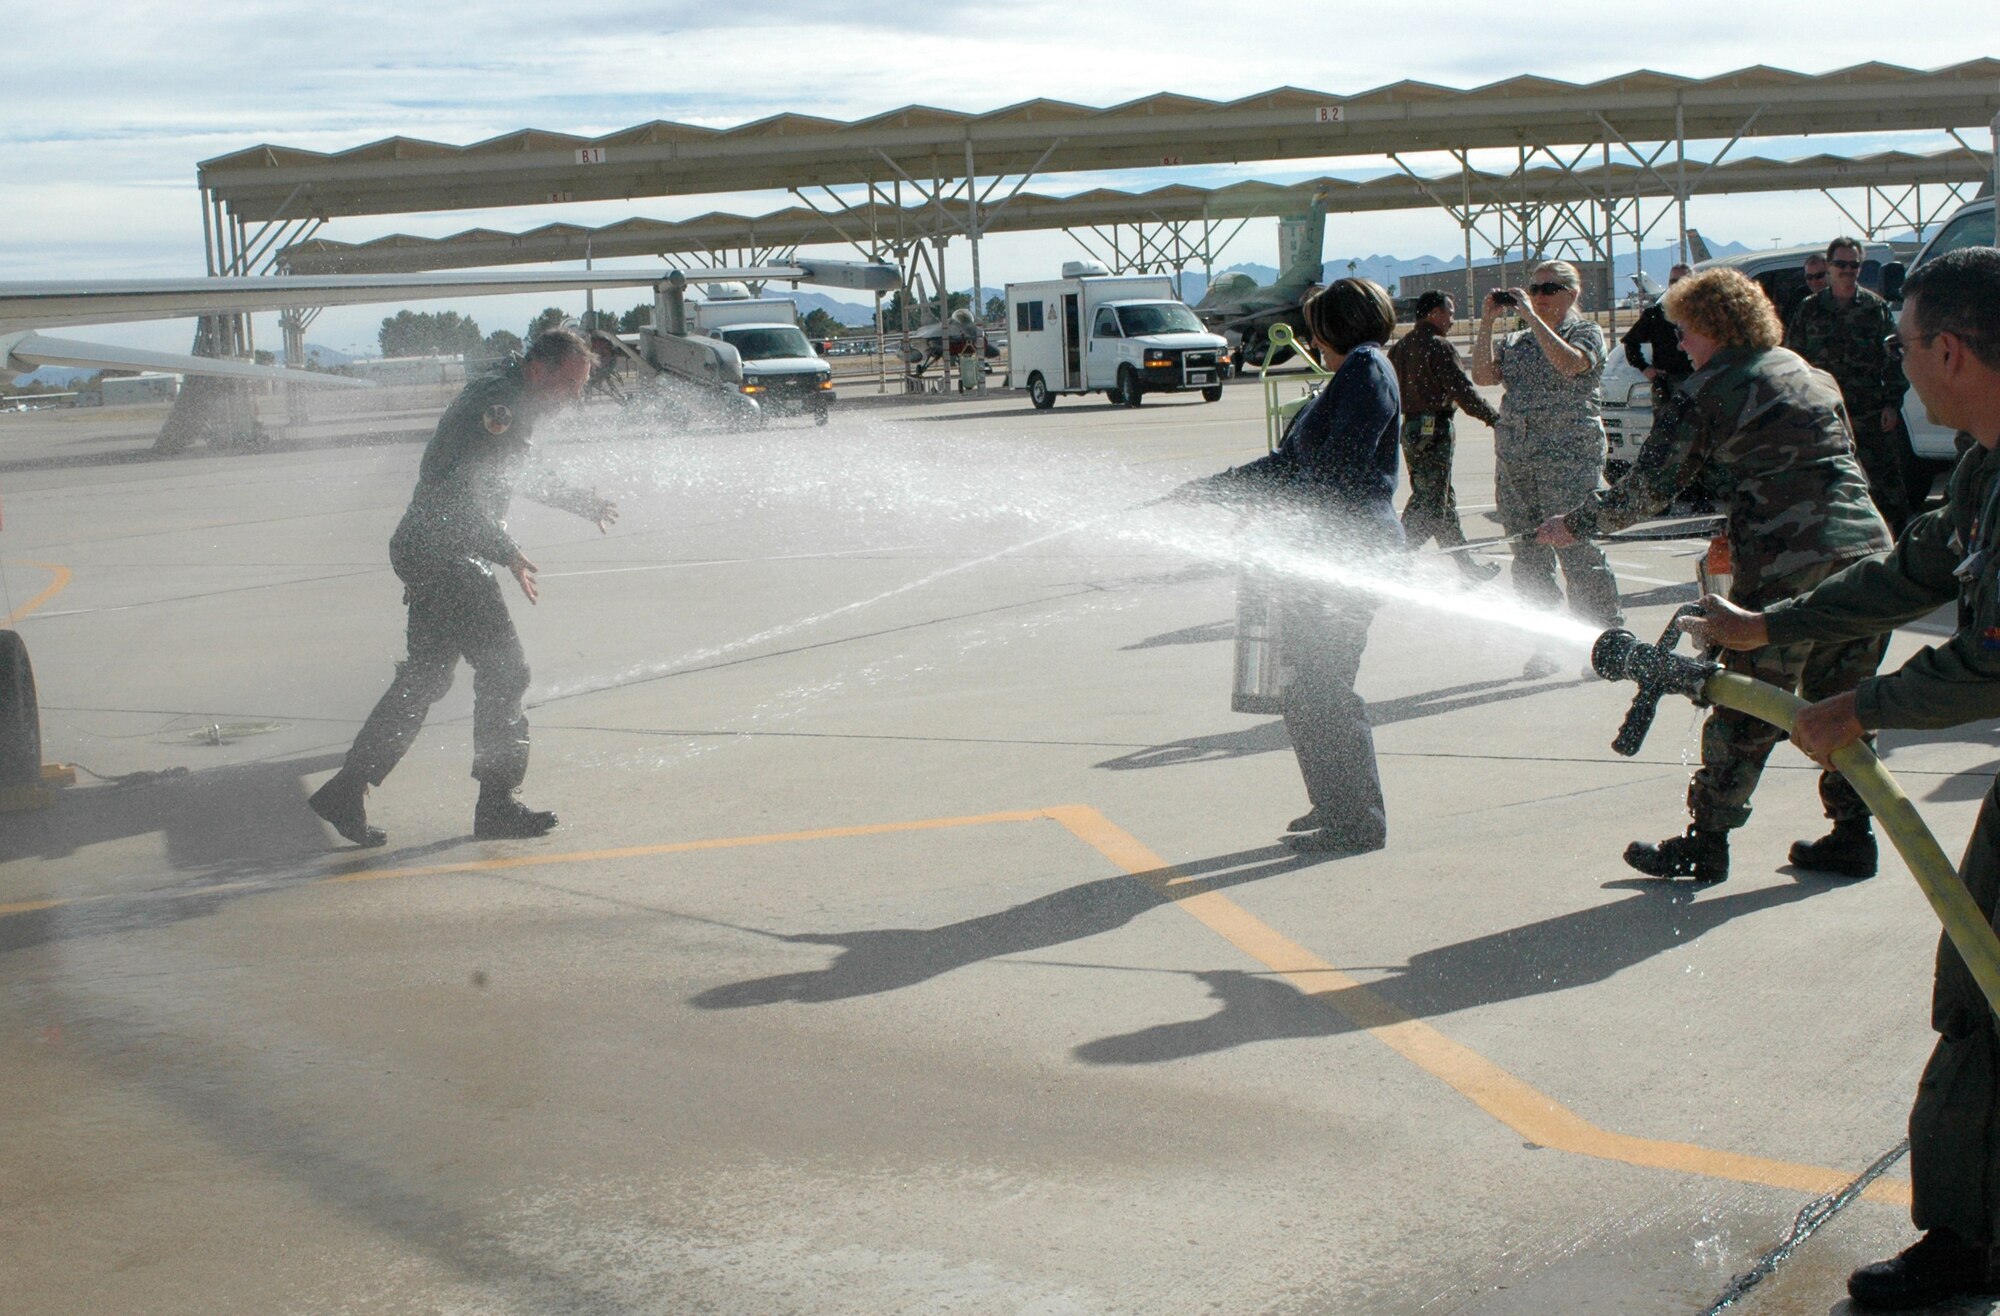 Brig. Gen. Rick Moisio, 162nd Fighter Wing commander, is hosed down by Master Sgt. Kerri Lane, Chief Master Sgt. Nikki Uremovich and Col. Jose Salinas after his final flight, or “fini” flight, here Dec. 19. The general is a command pilot with more than 30 years of experience and 6,000 flying hours mostly in fighter aircraft. He joined the 162nd in 1984 and assumed command of the unit in 2004. Following the fini flight, Guardsmen here held a farewell event for the commander who will depart the wing for another assignment in February. (Air National Guard photo by Capt. Gabe Johnson)
